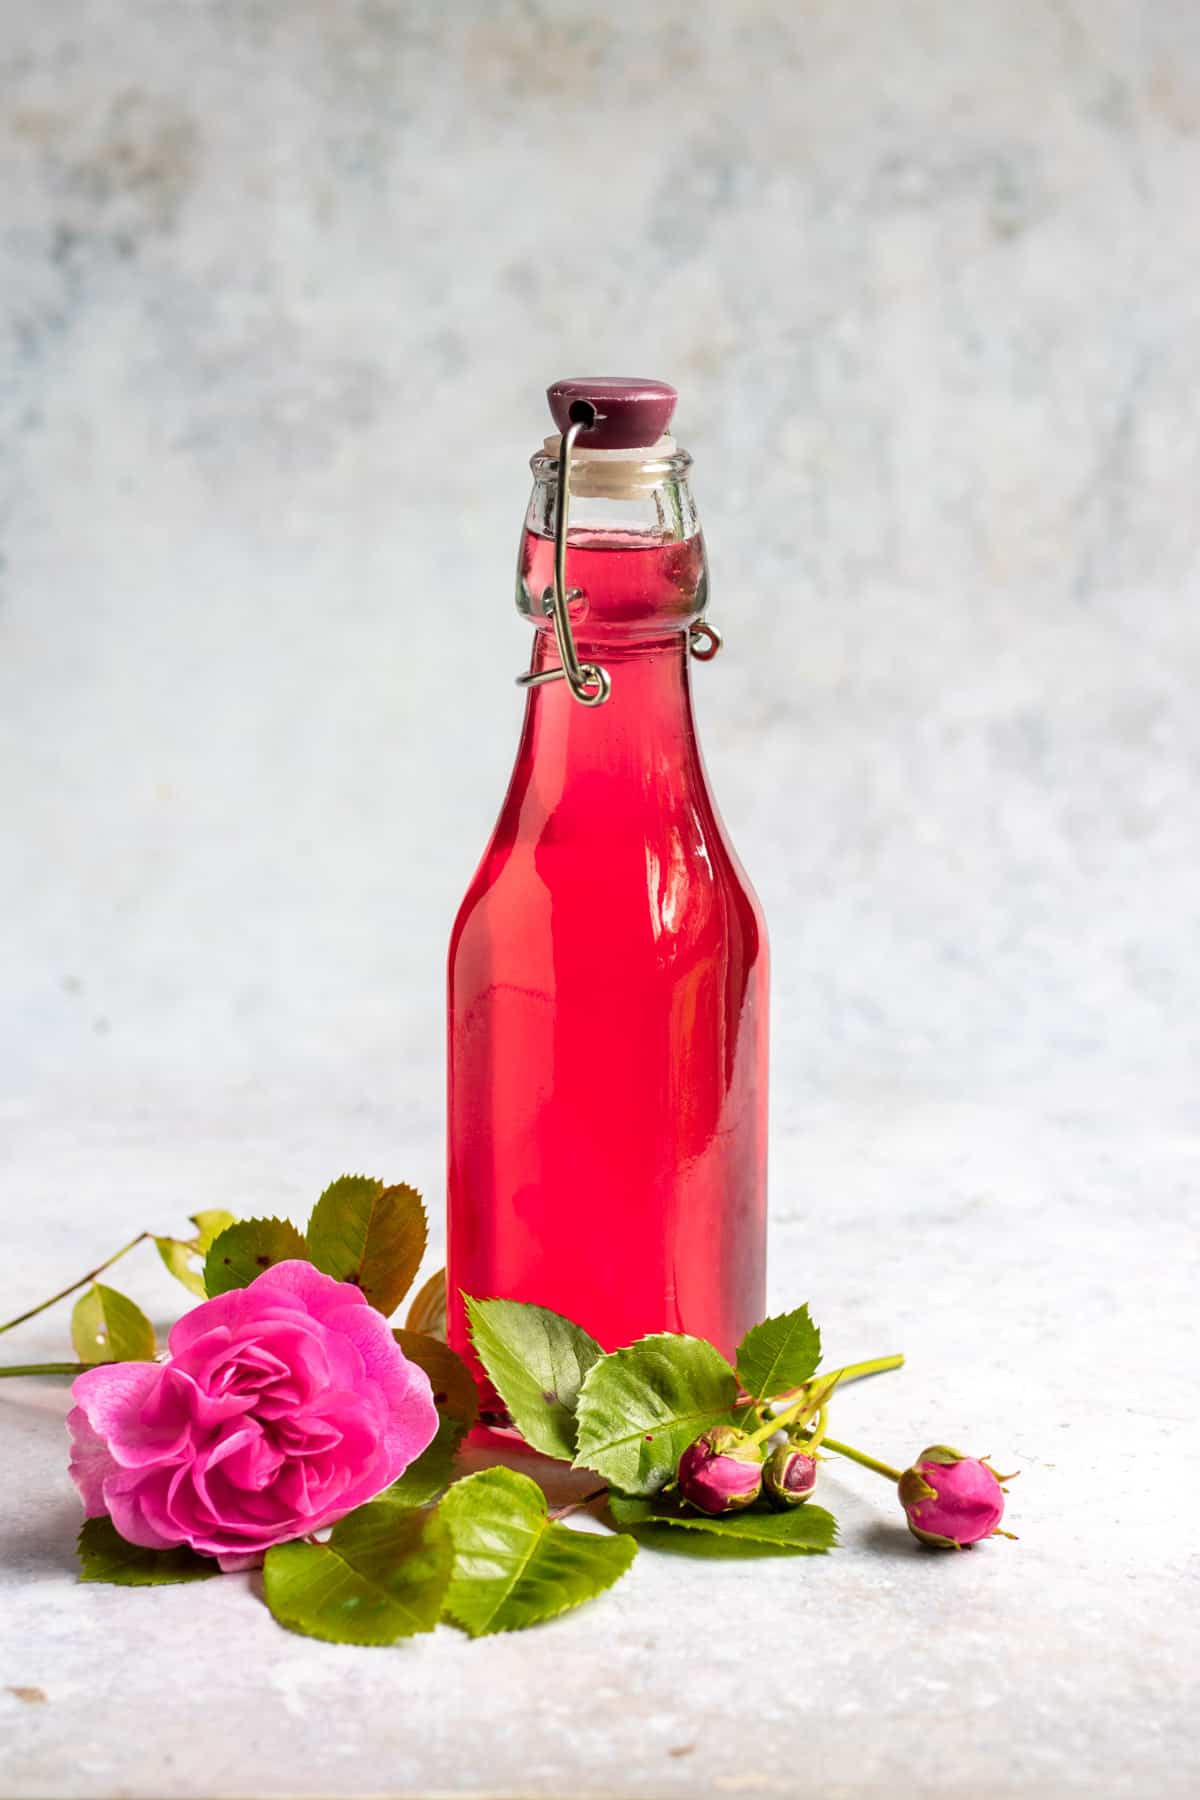 Bottle of syrup next to roses.